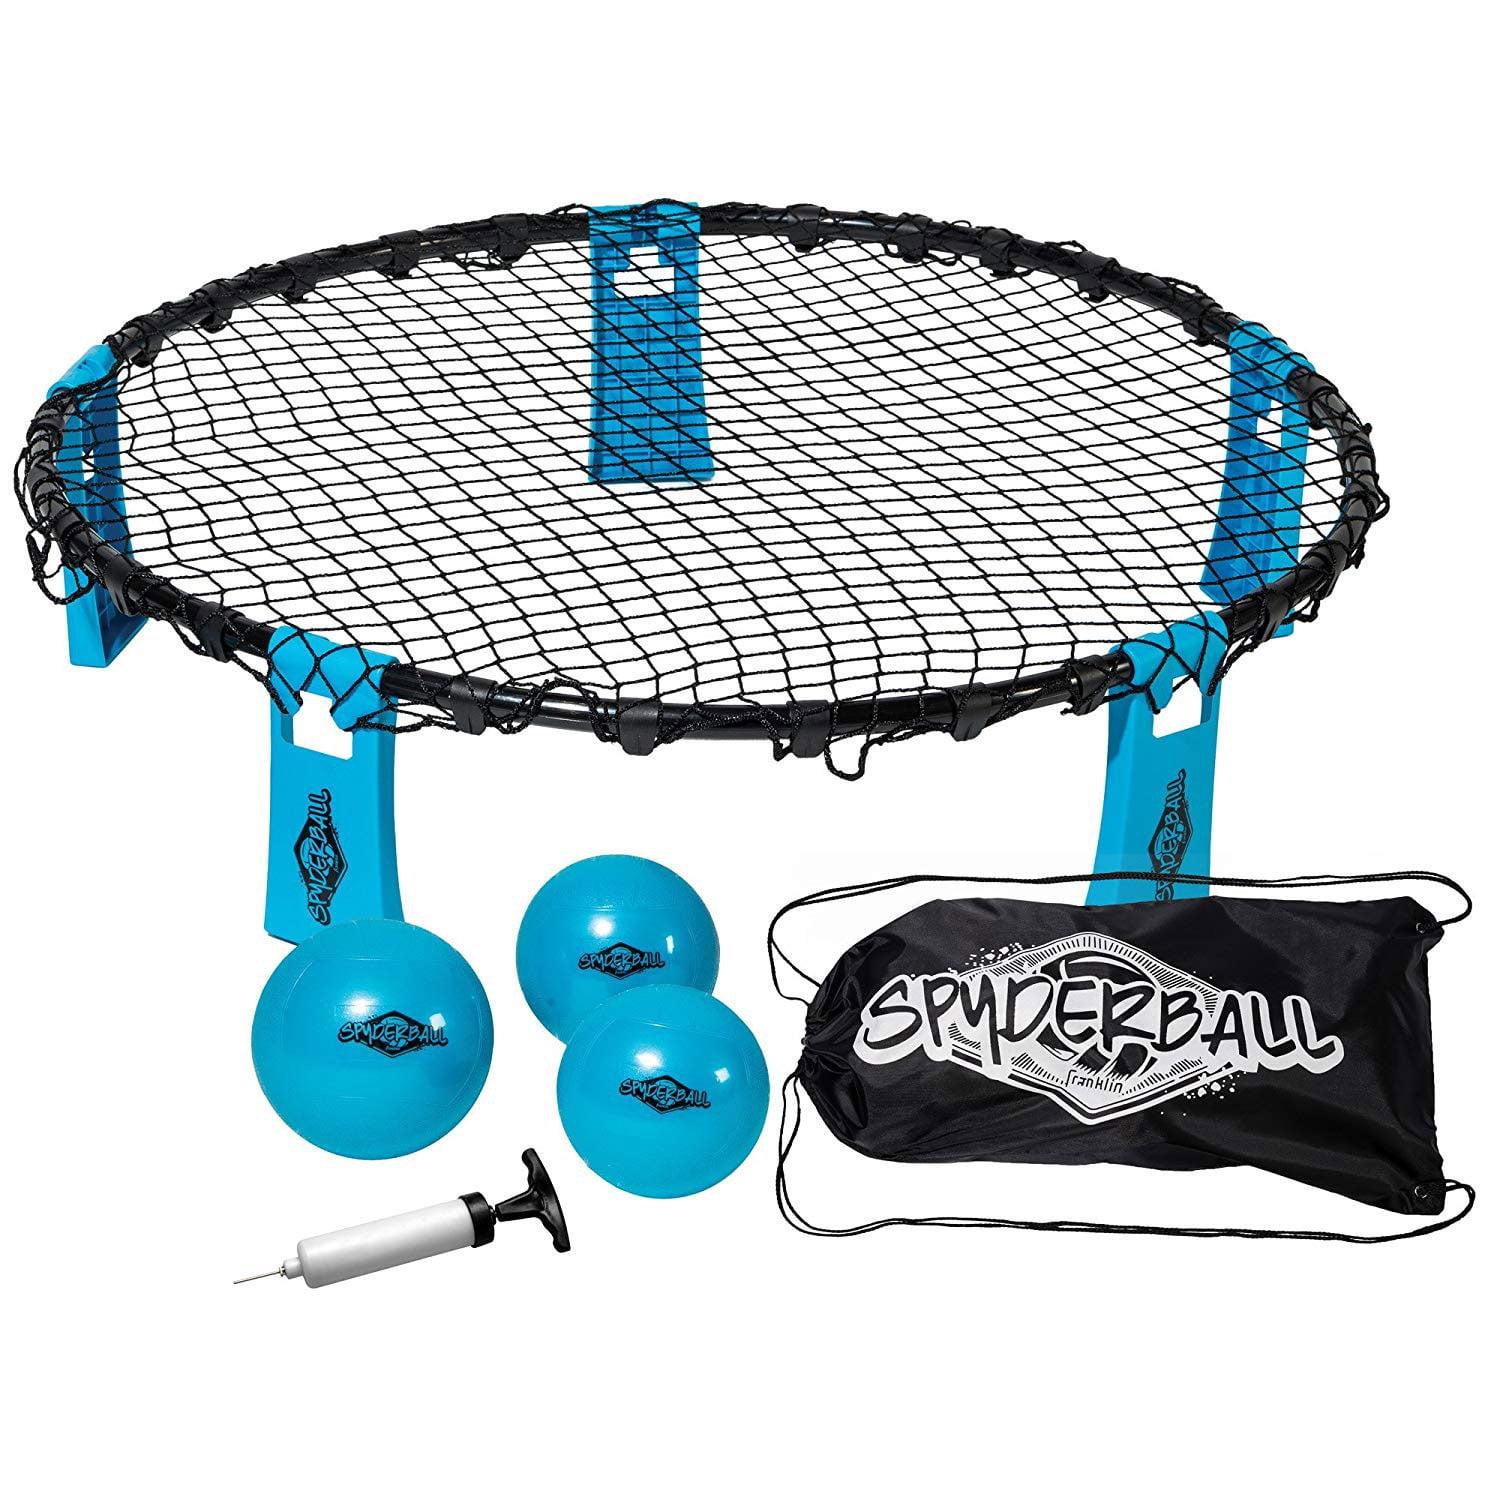 Franklin Spyderball Outdoor Game Set with Net and Balls